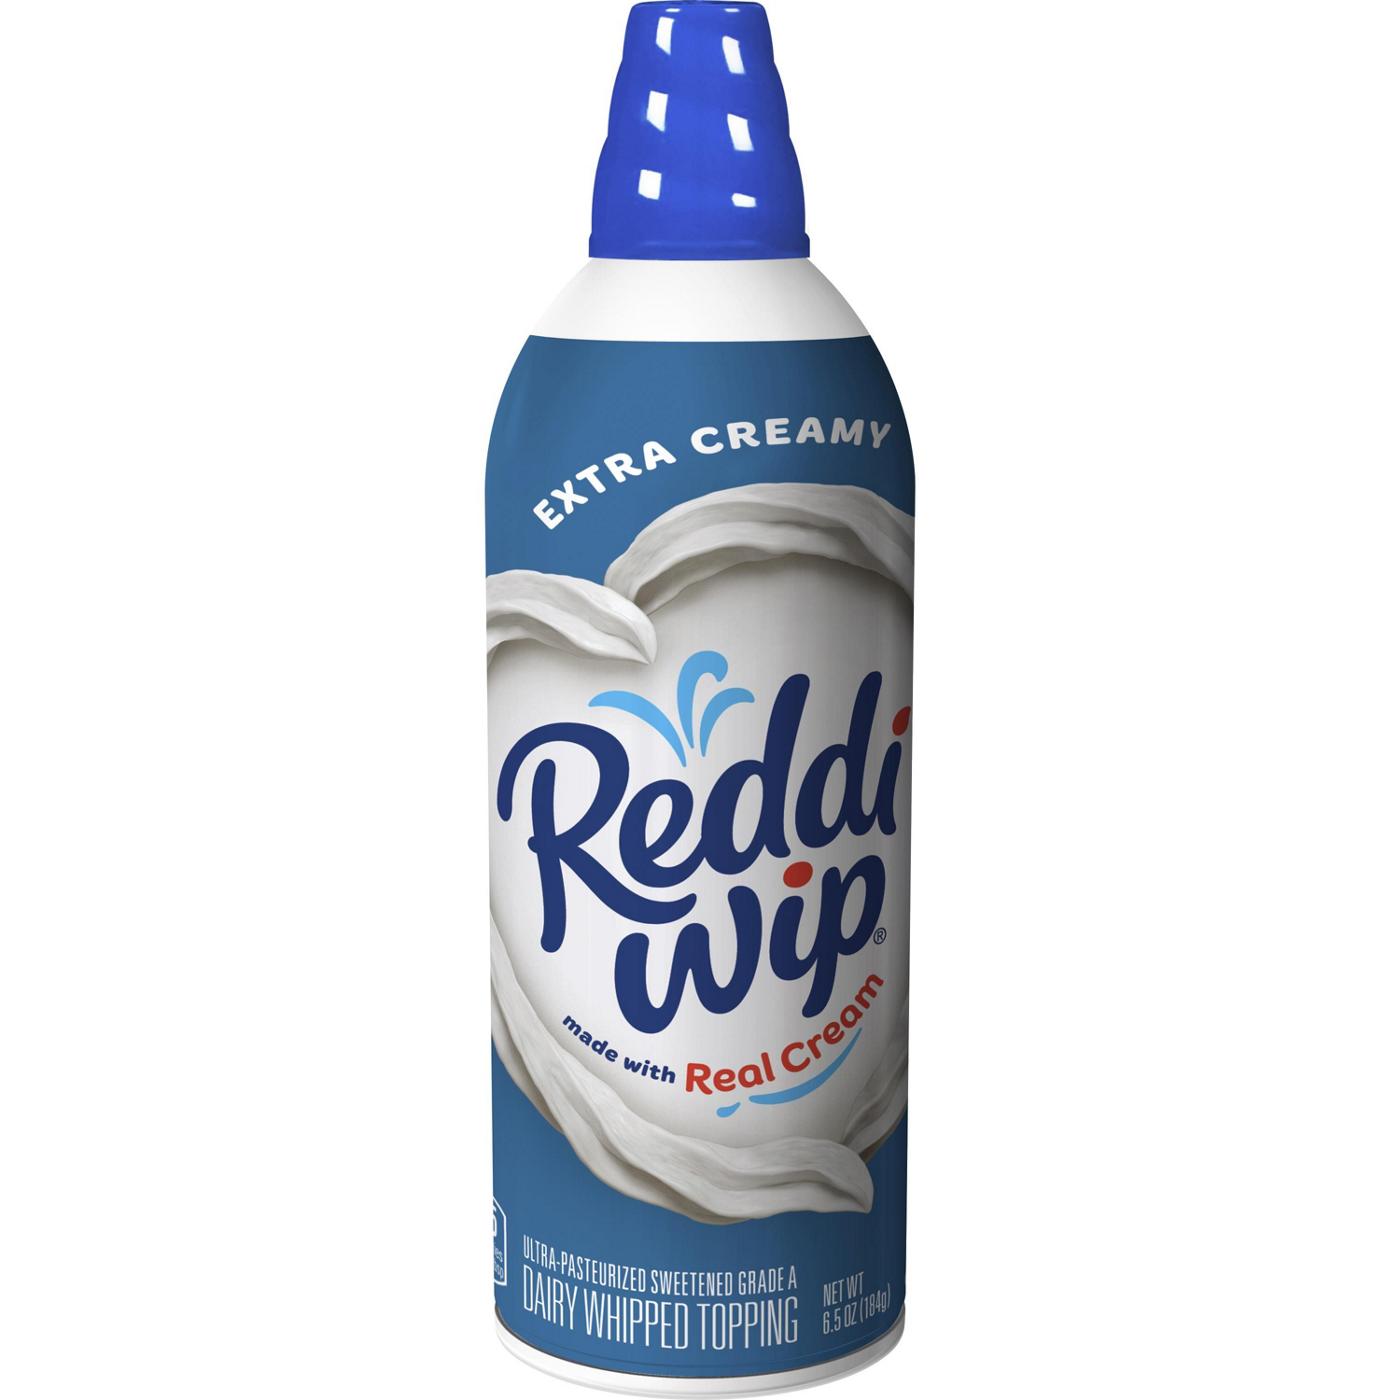 Reddi Wip Extra Creamy Whipped Topping Made with Real Cream; image 1 of 5